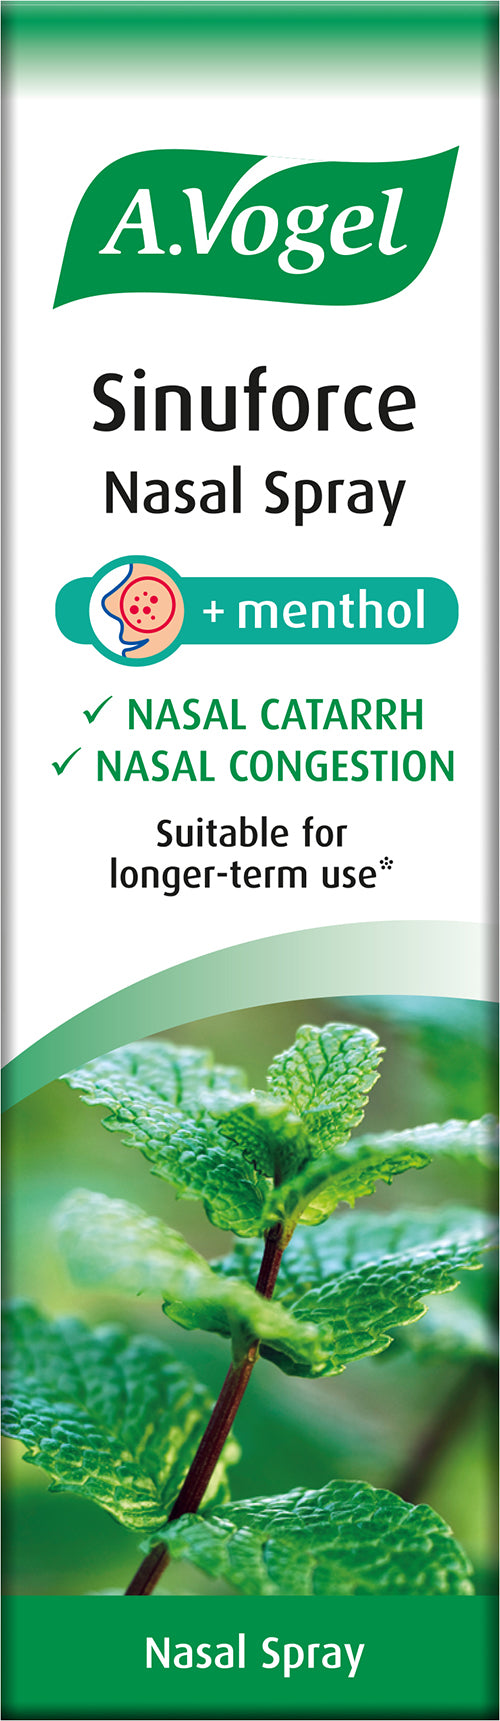 Sinuforce Nasal Spray - Blocked nose remedy Sinuforce for the relief of nasal congestion and catarrh